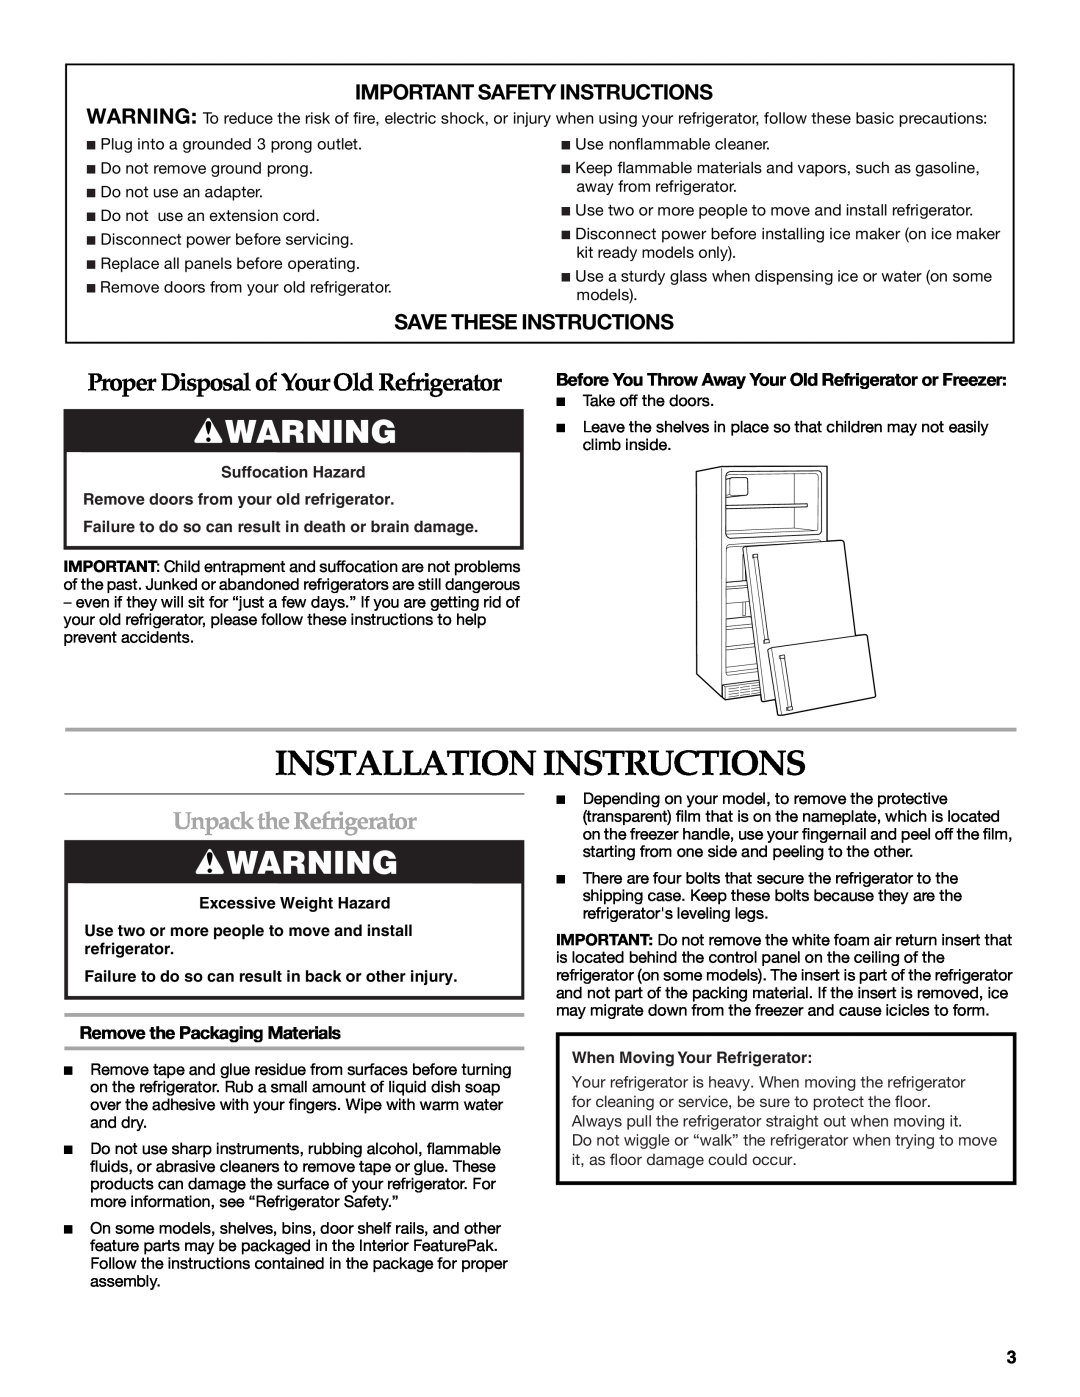 KitchenAid TOP-MOUNT REFRIGERATOR manual Installation Instructions, Proper Disposal of Your Old Refrigerator 